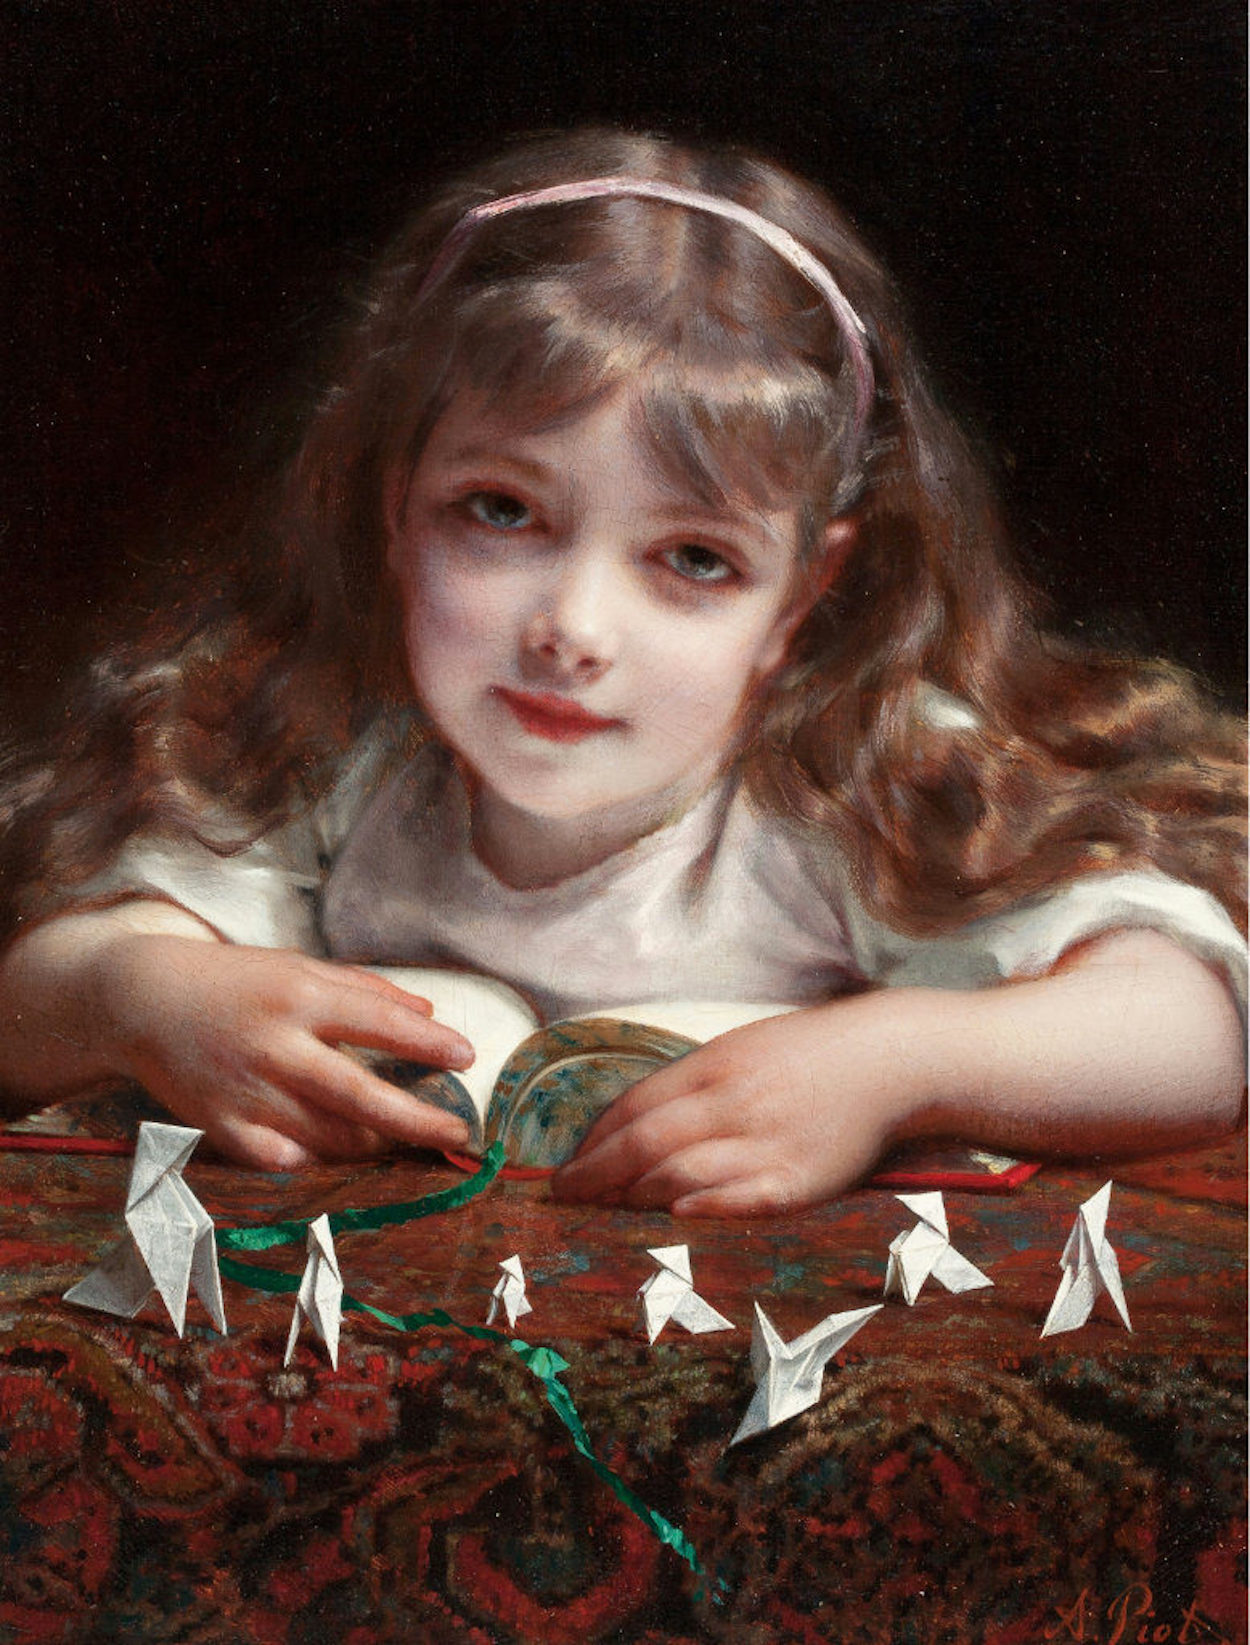 Origami Dreams by Adolphe Piot - 1850-1910 - 52 x 39,5 cm private collection